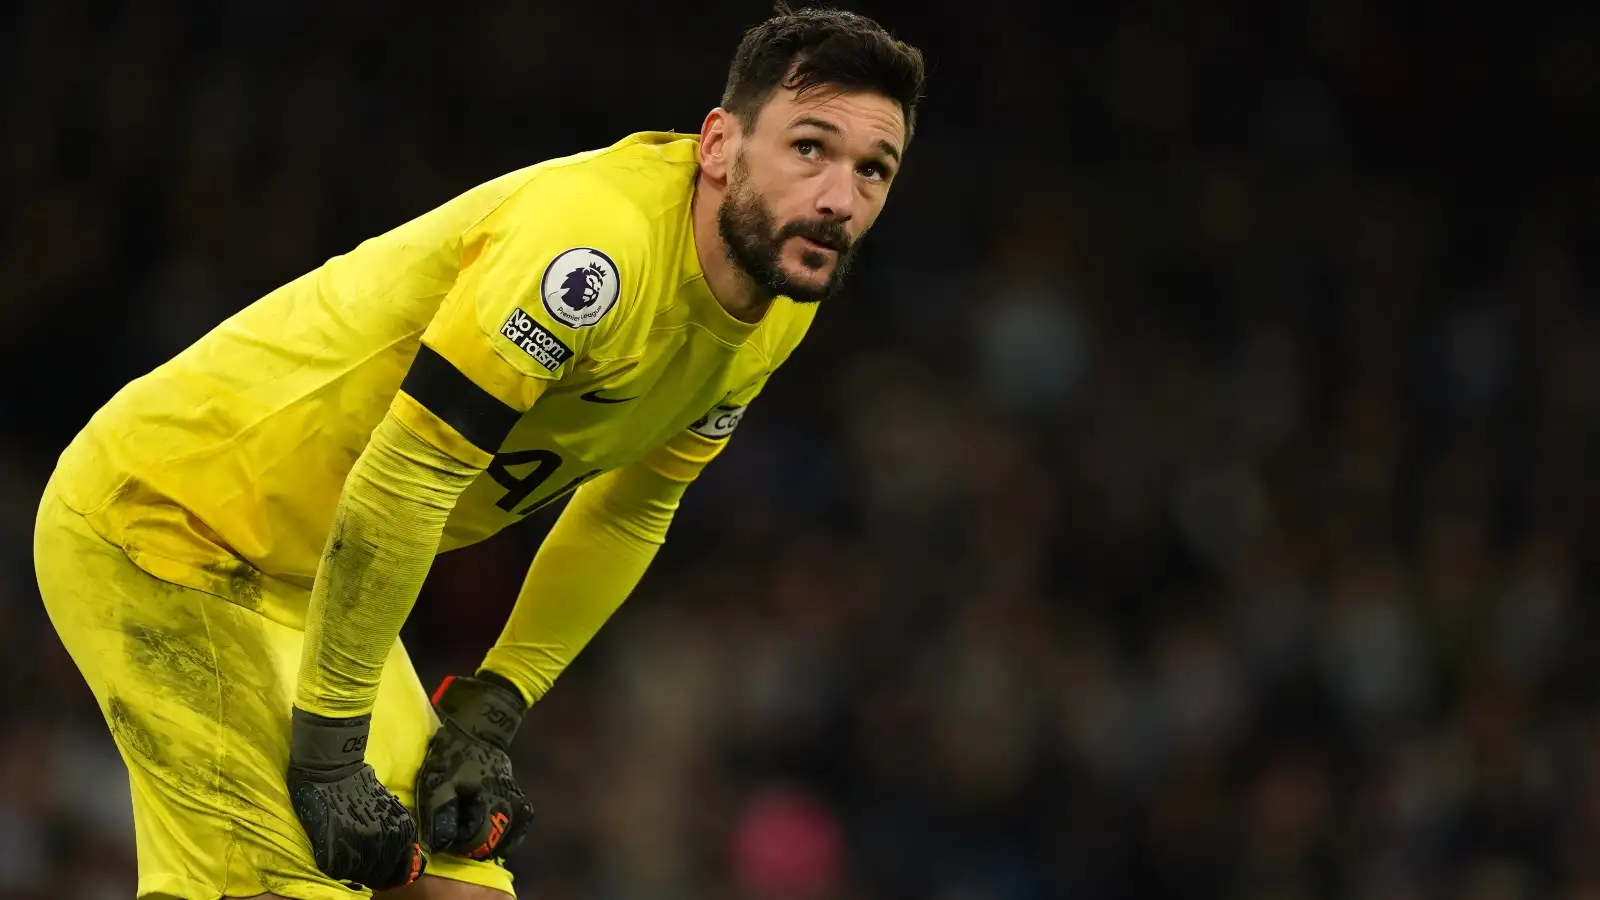 Hugo Lloris reacts after conceding a goal during Tottenham's 4-2 defeat to Manchester City.